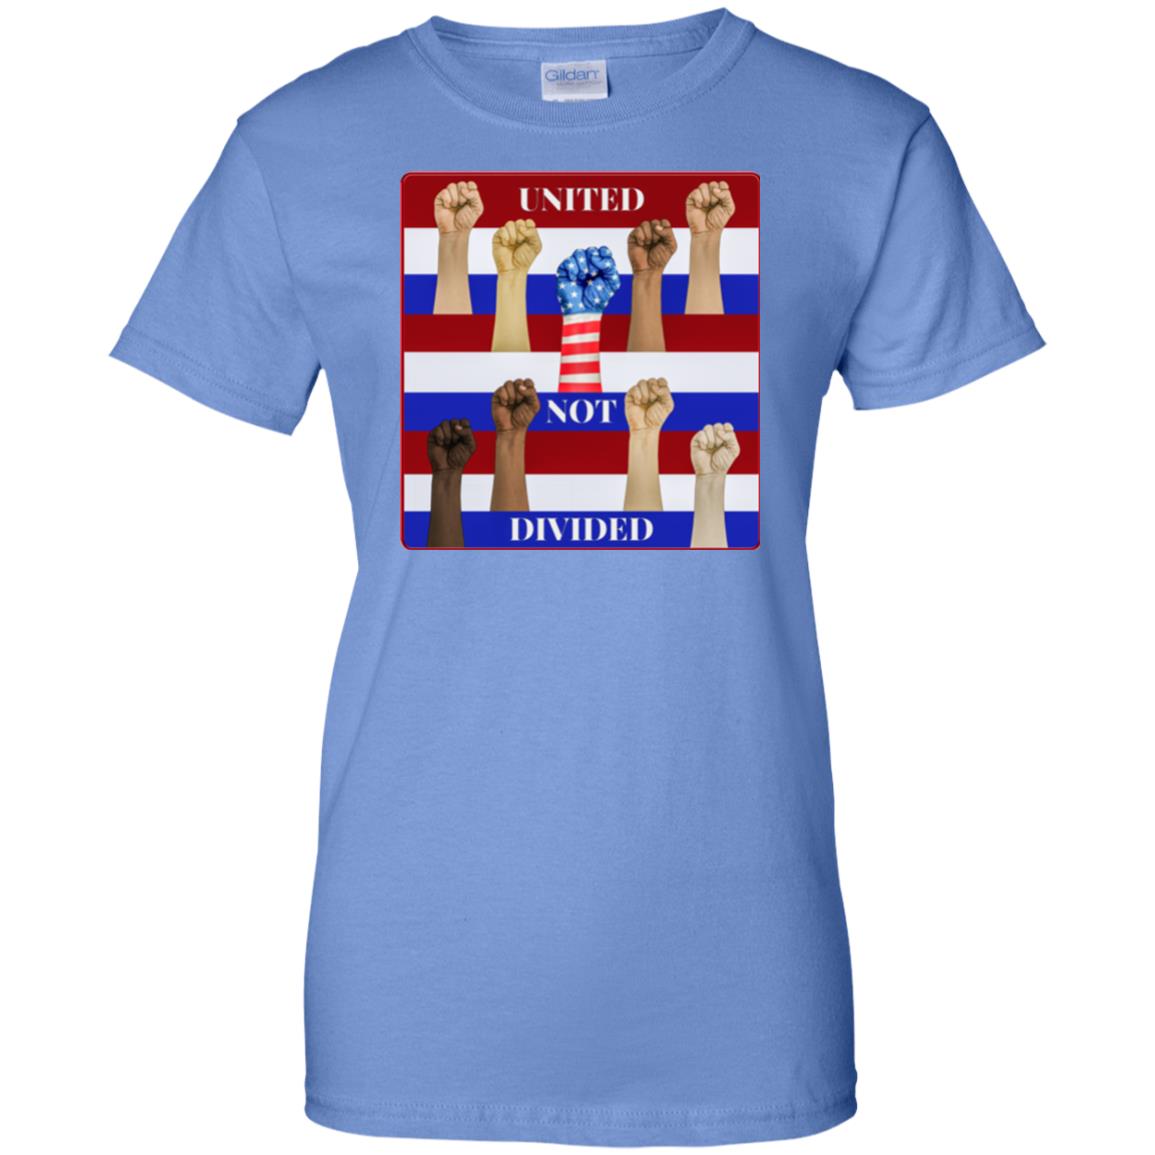 united not divided - Women's Relaxed Fit T-Shirt